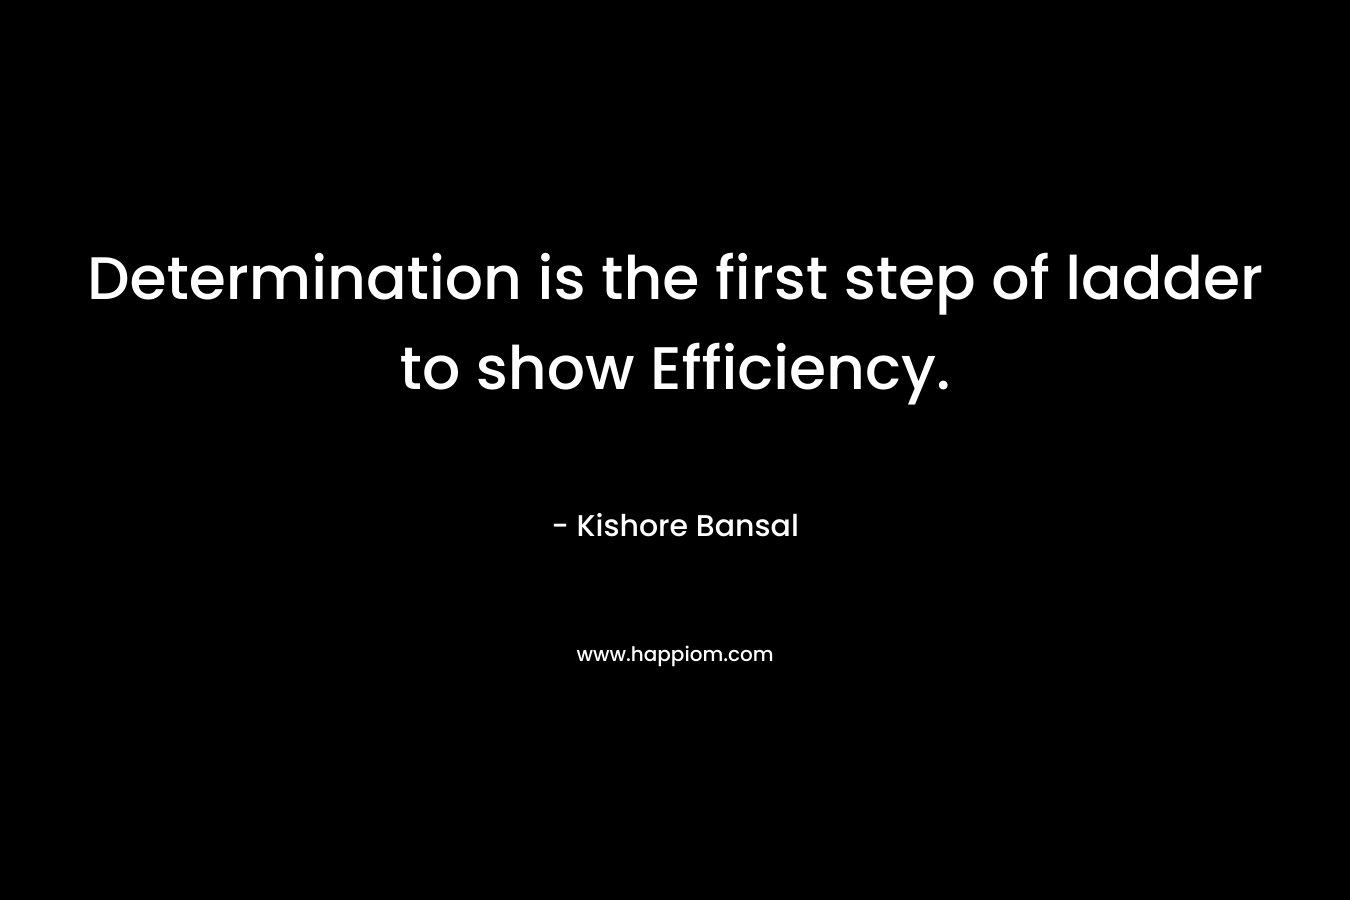 Determination is the first step of ladder to show Efficiency.